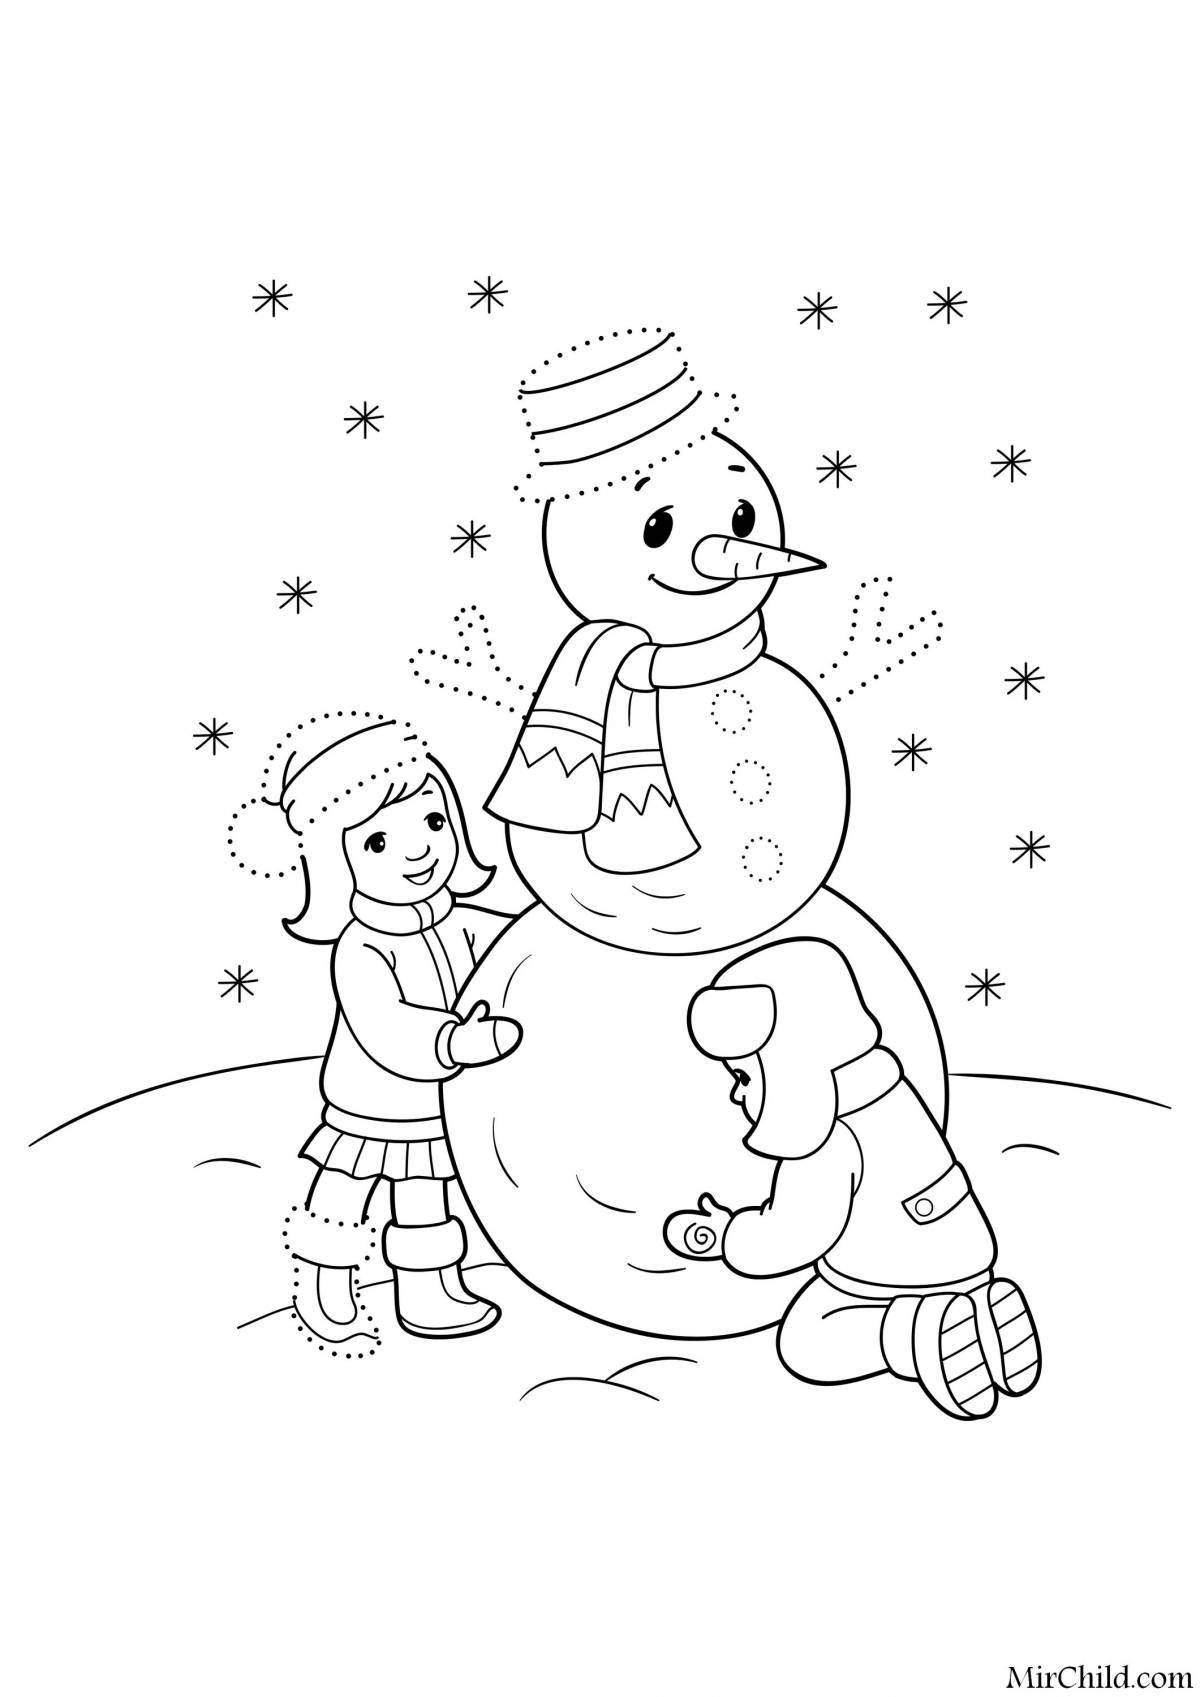 Animated snowman girl coloring page